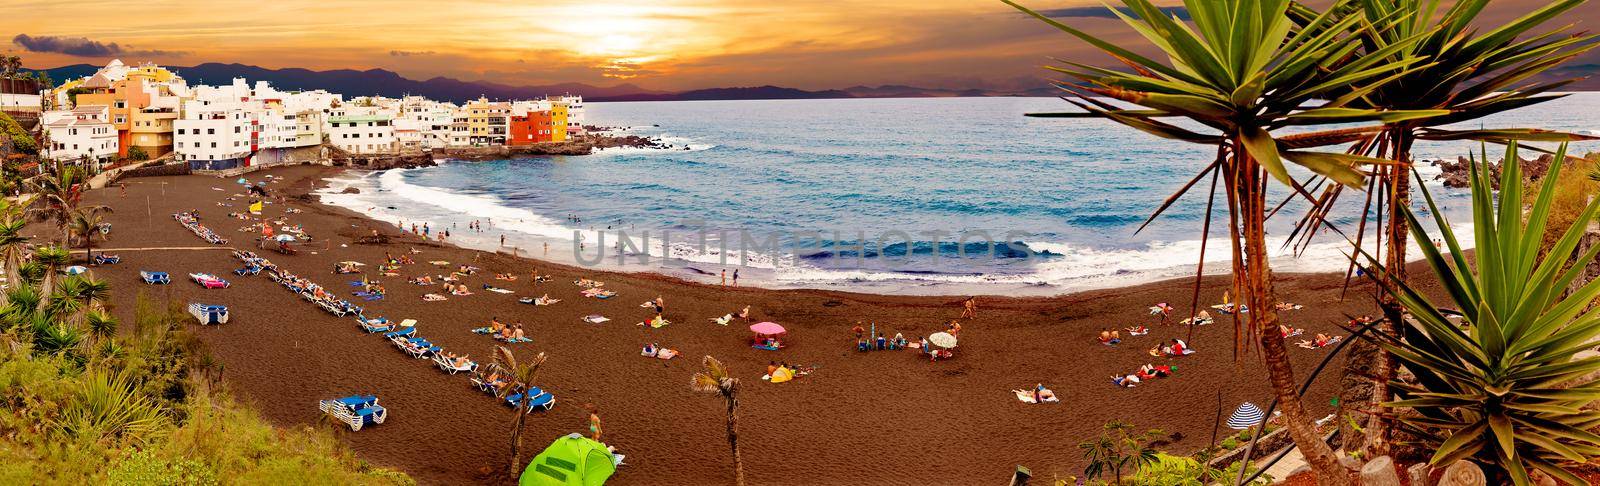 Sunset scenery Spain sea and island .Beach adventures and travel concept